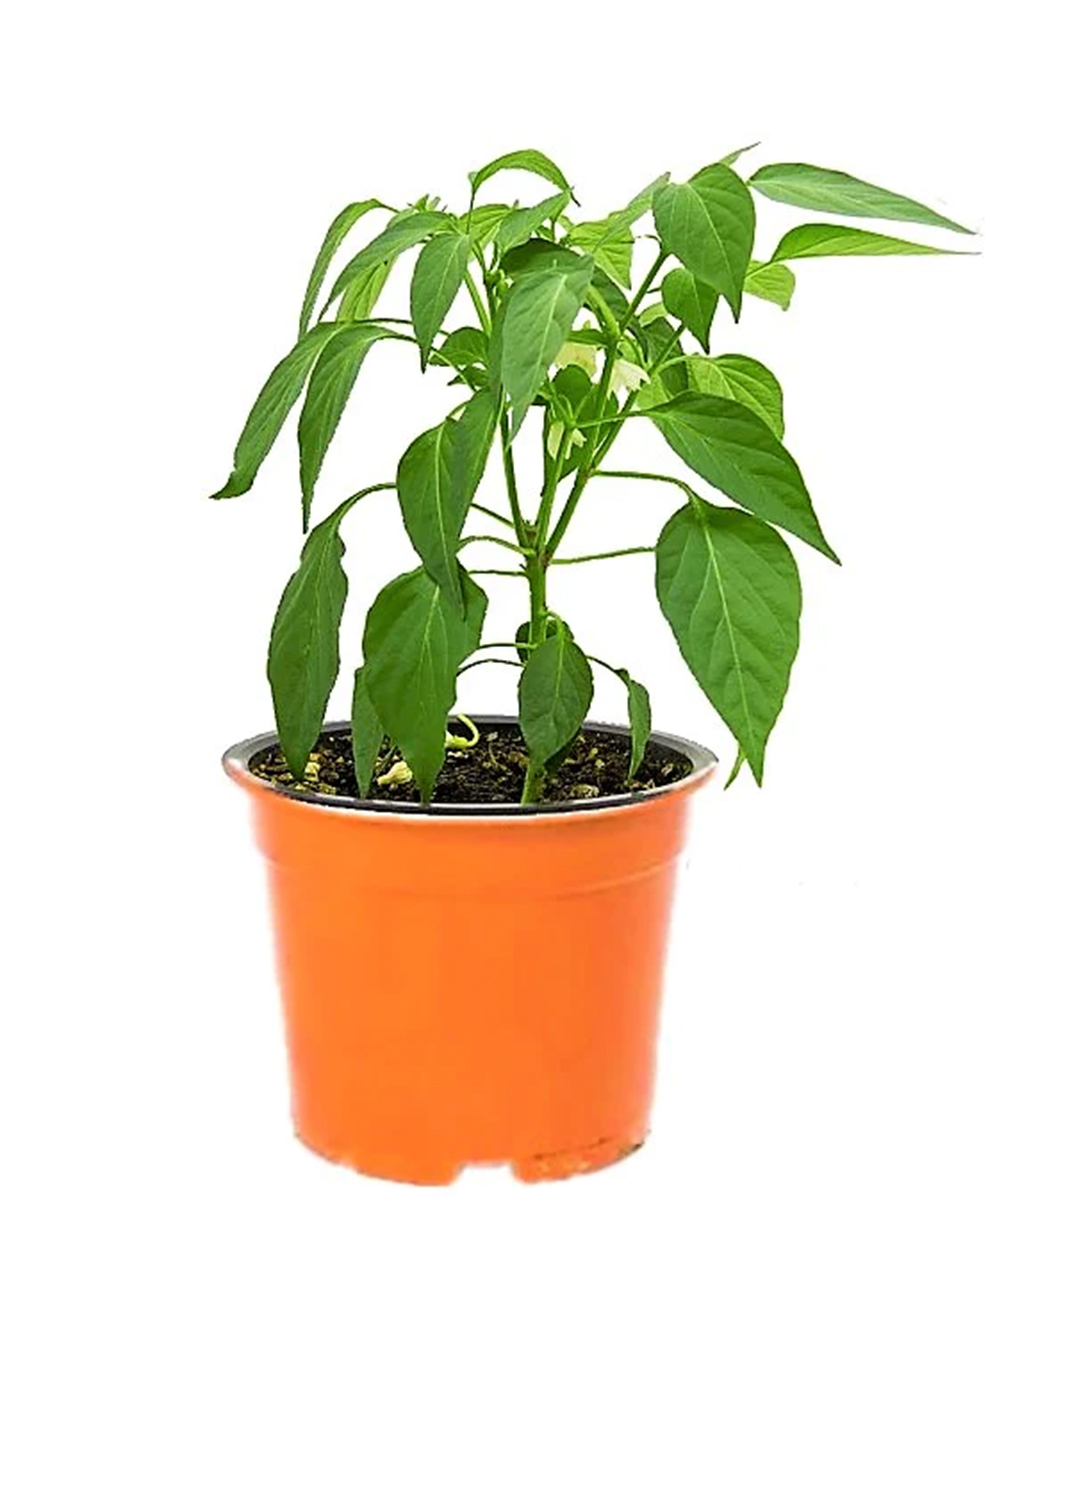 Hot Chili Plant {with fruit}